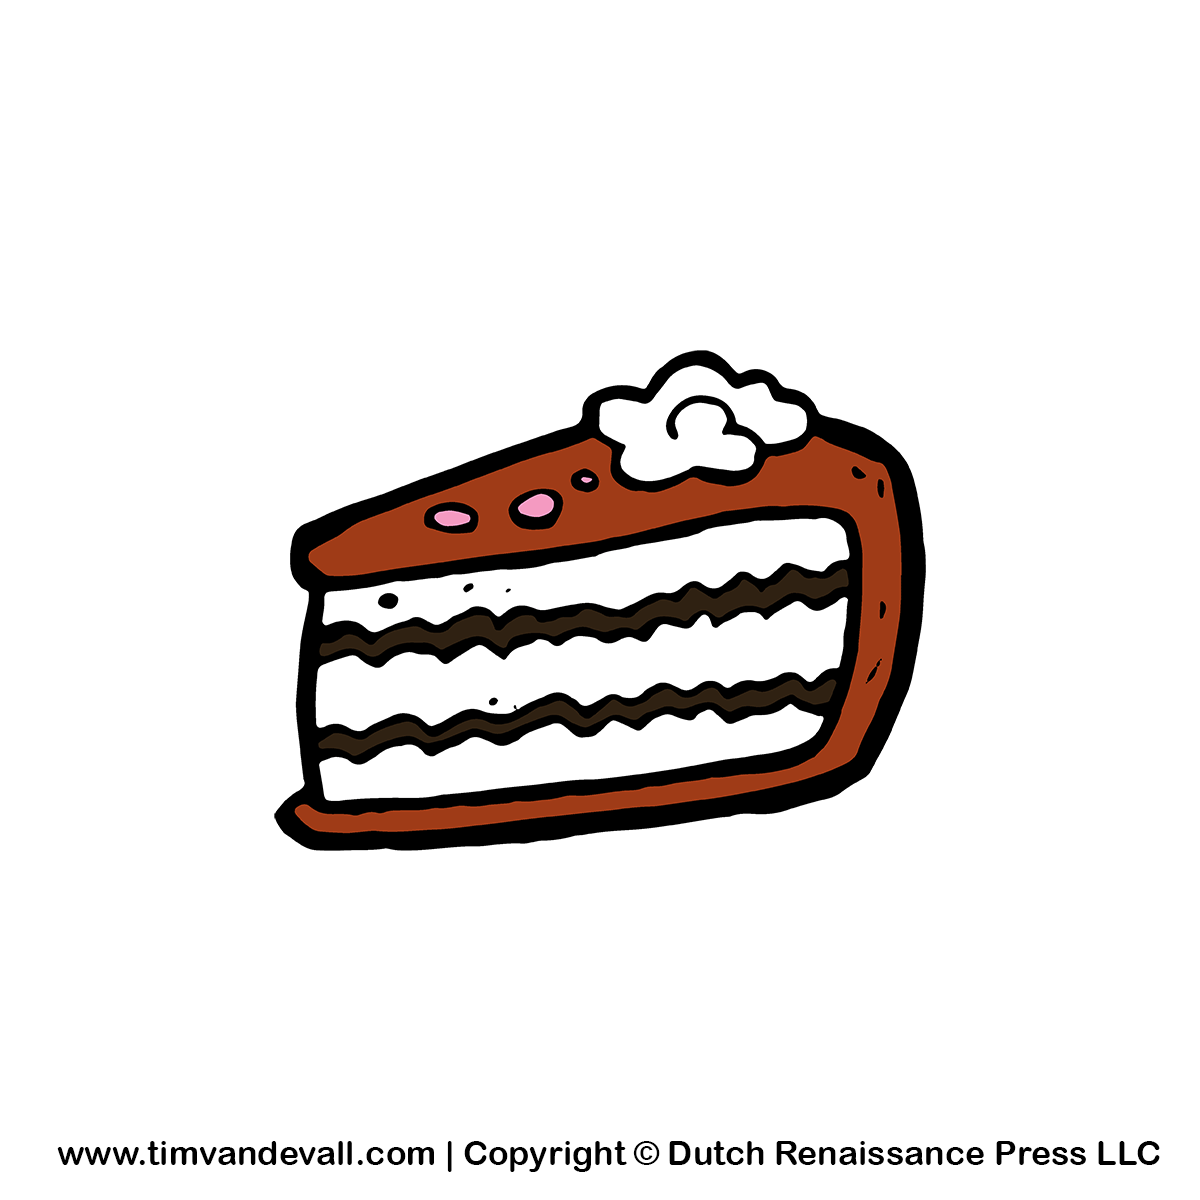 Cake Slice Clipart Black And White Cake Slice Clipart Png